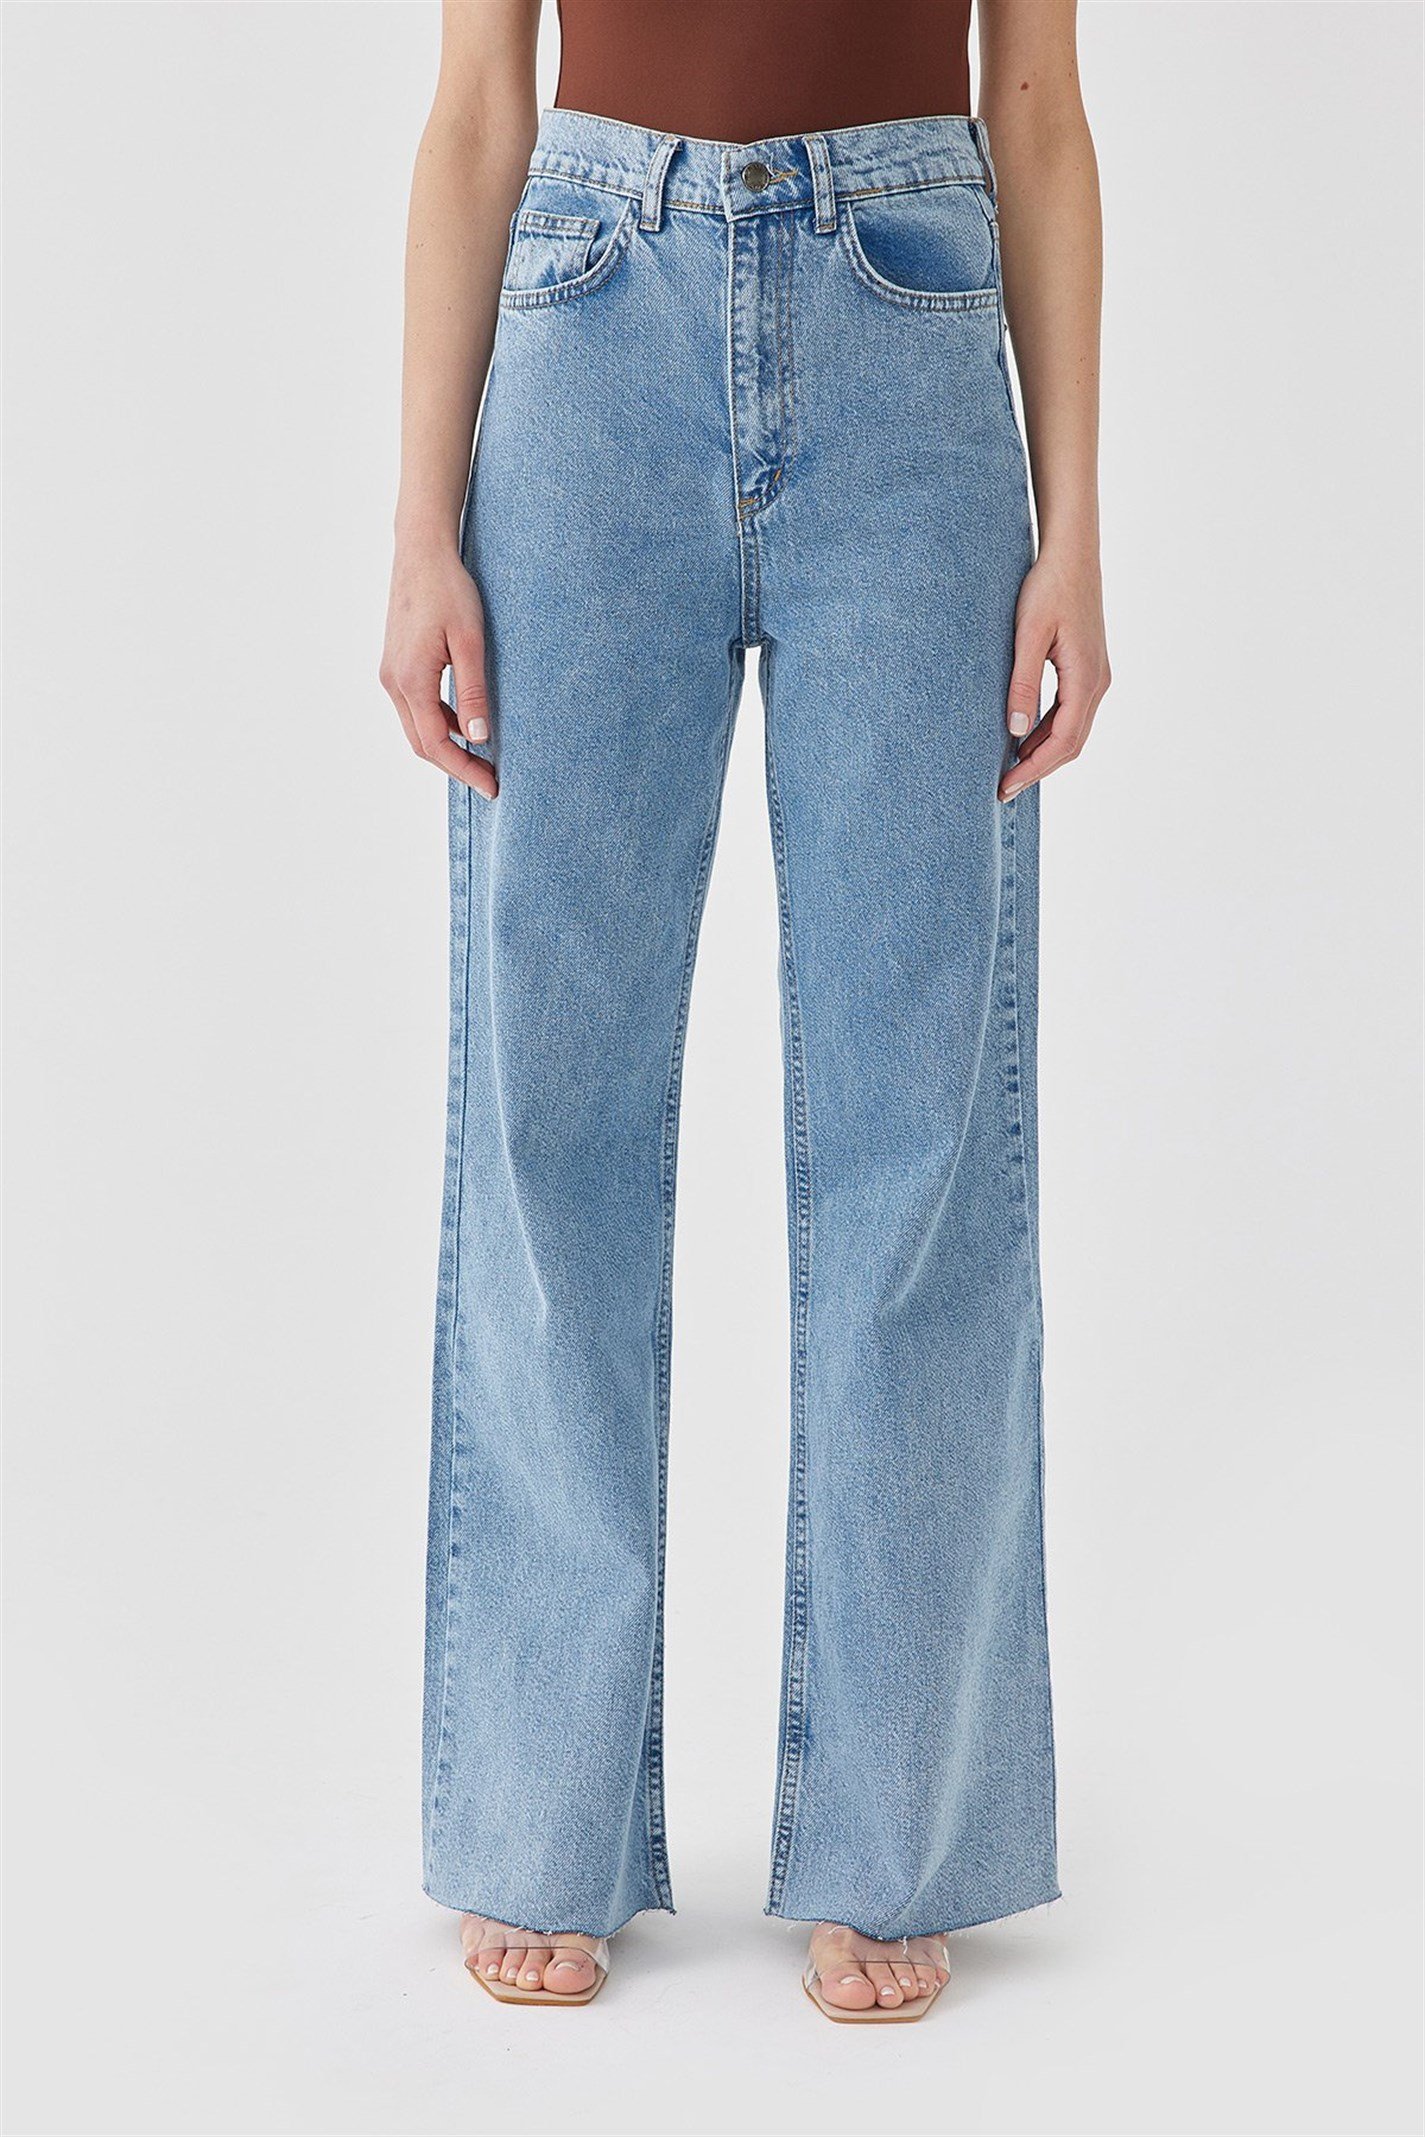 Blue Palazzo Jeans | Suud Collection